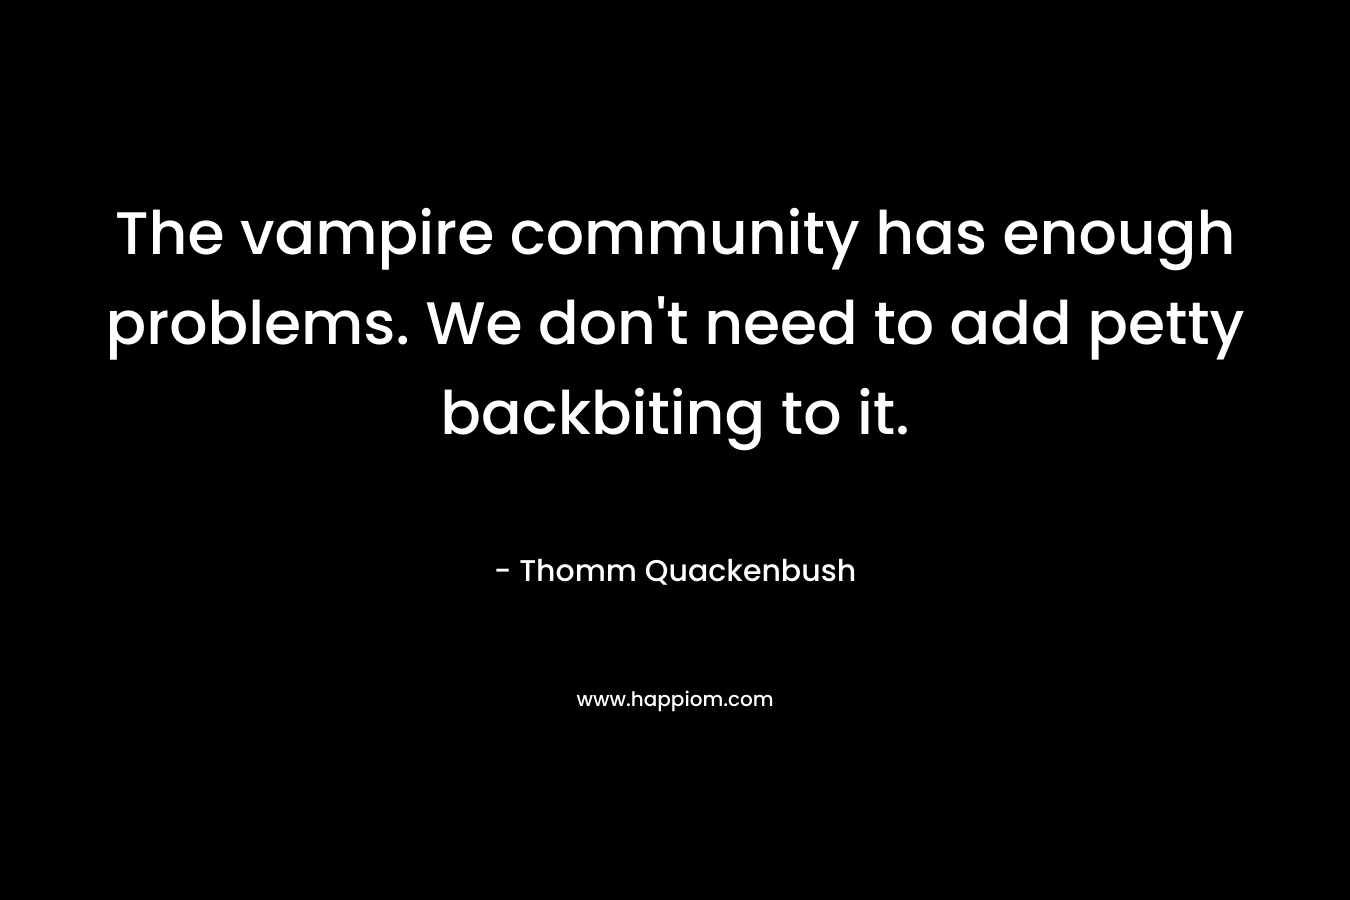 The vampire community has enough problems. We don’t need to add petty backbiting to it. – Thomm Quackenbush